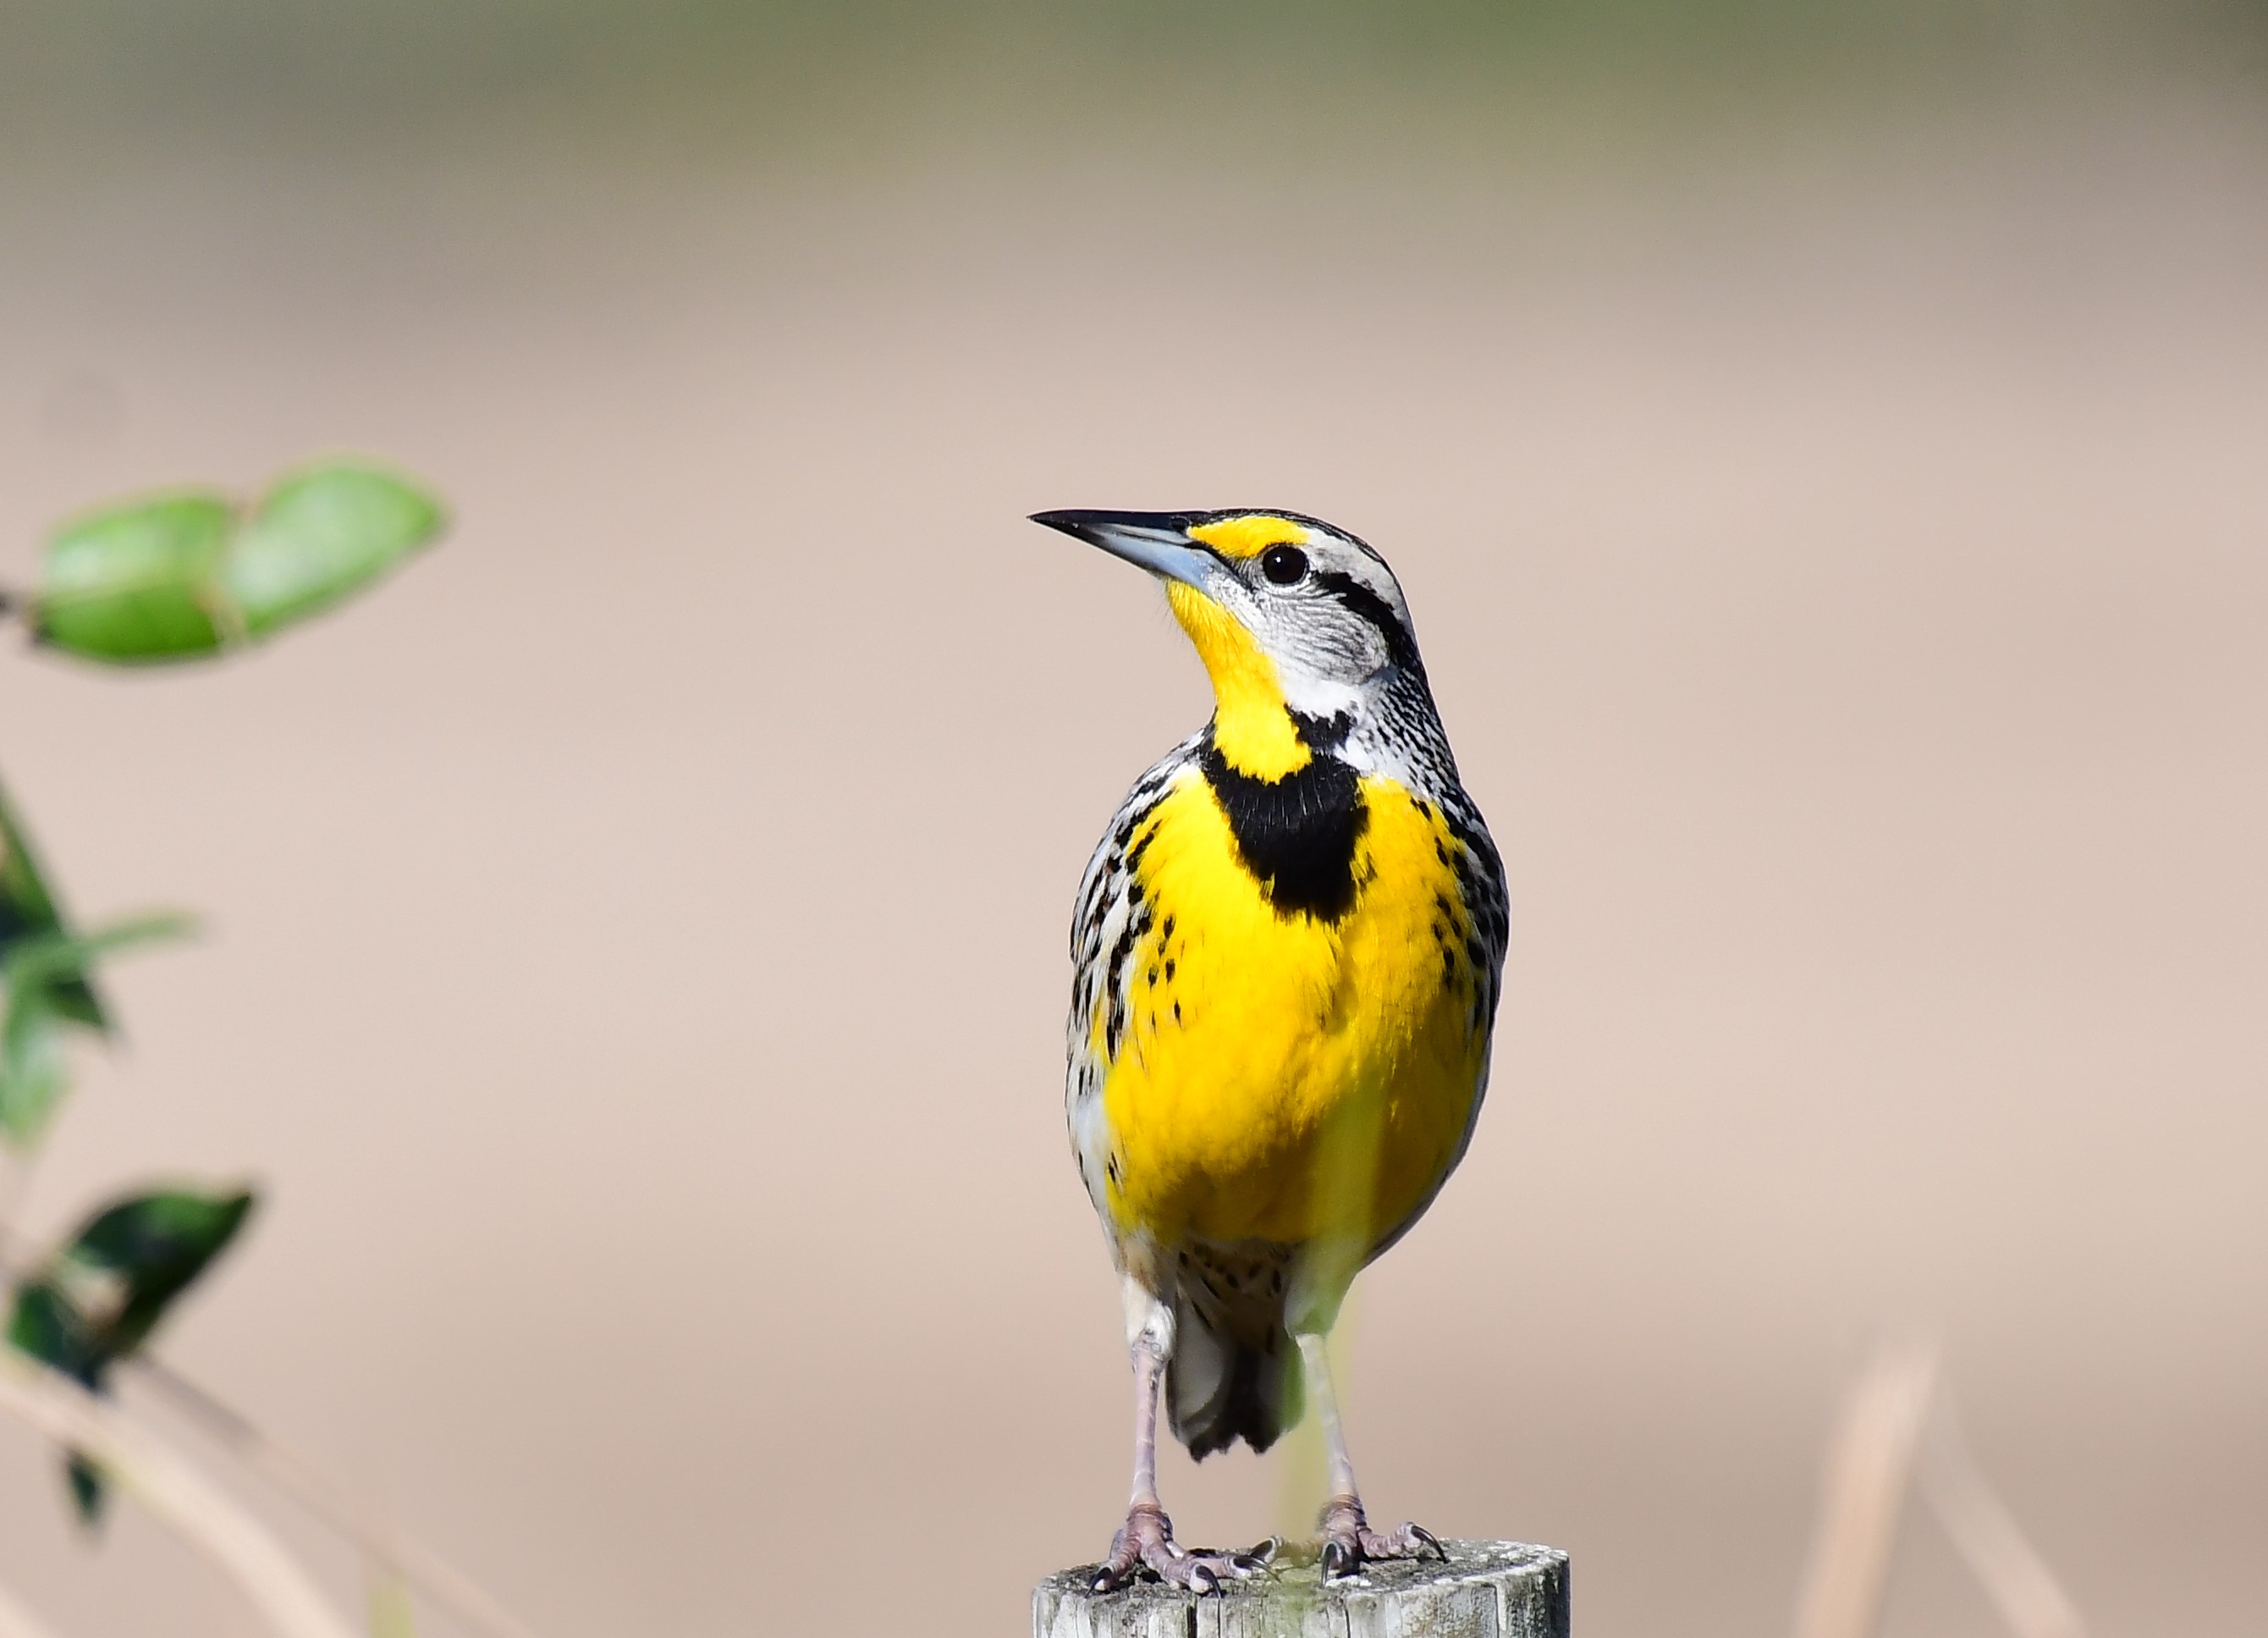 Eastern Meadowlark perched on a wooden post. Photo: John Wolaver.